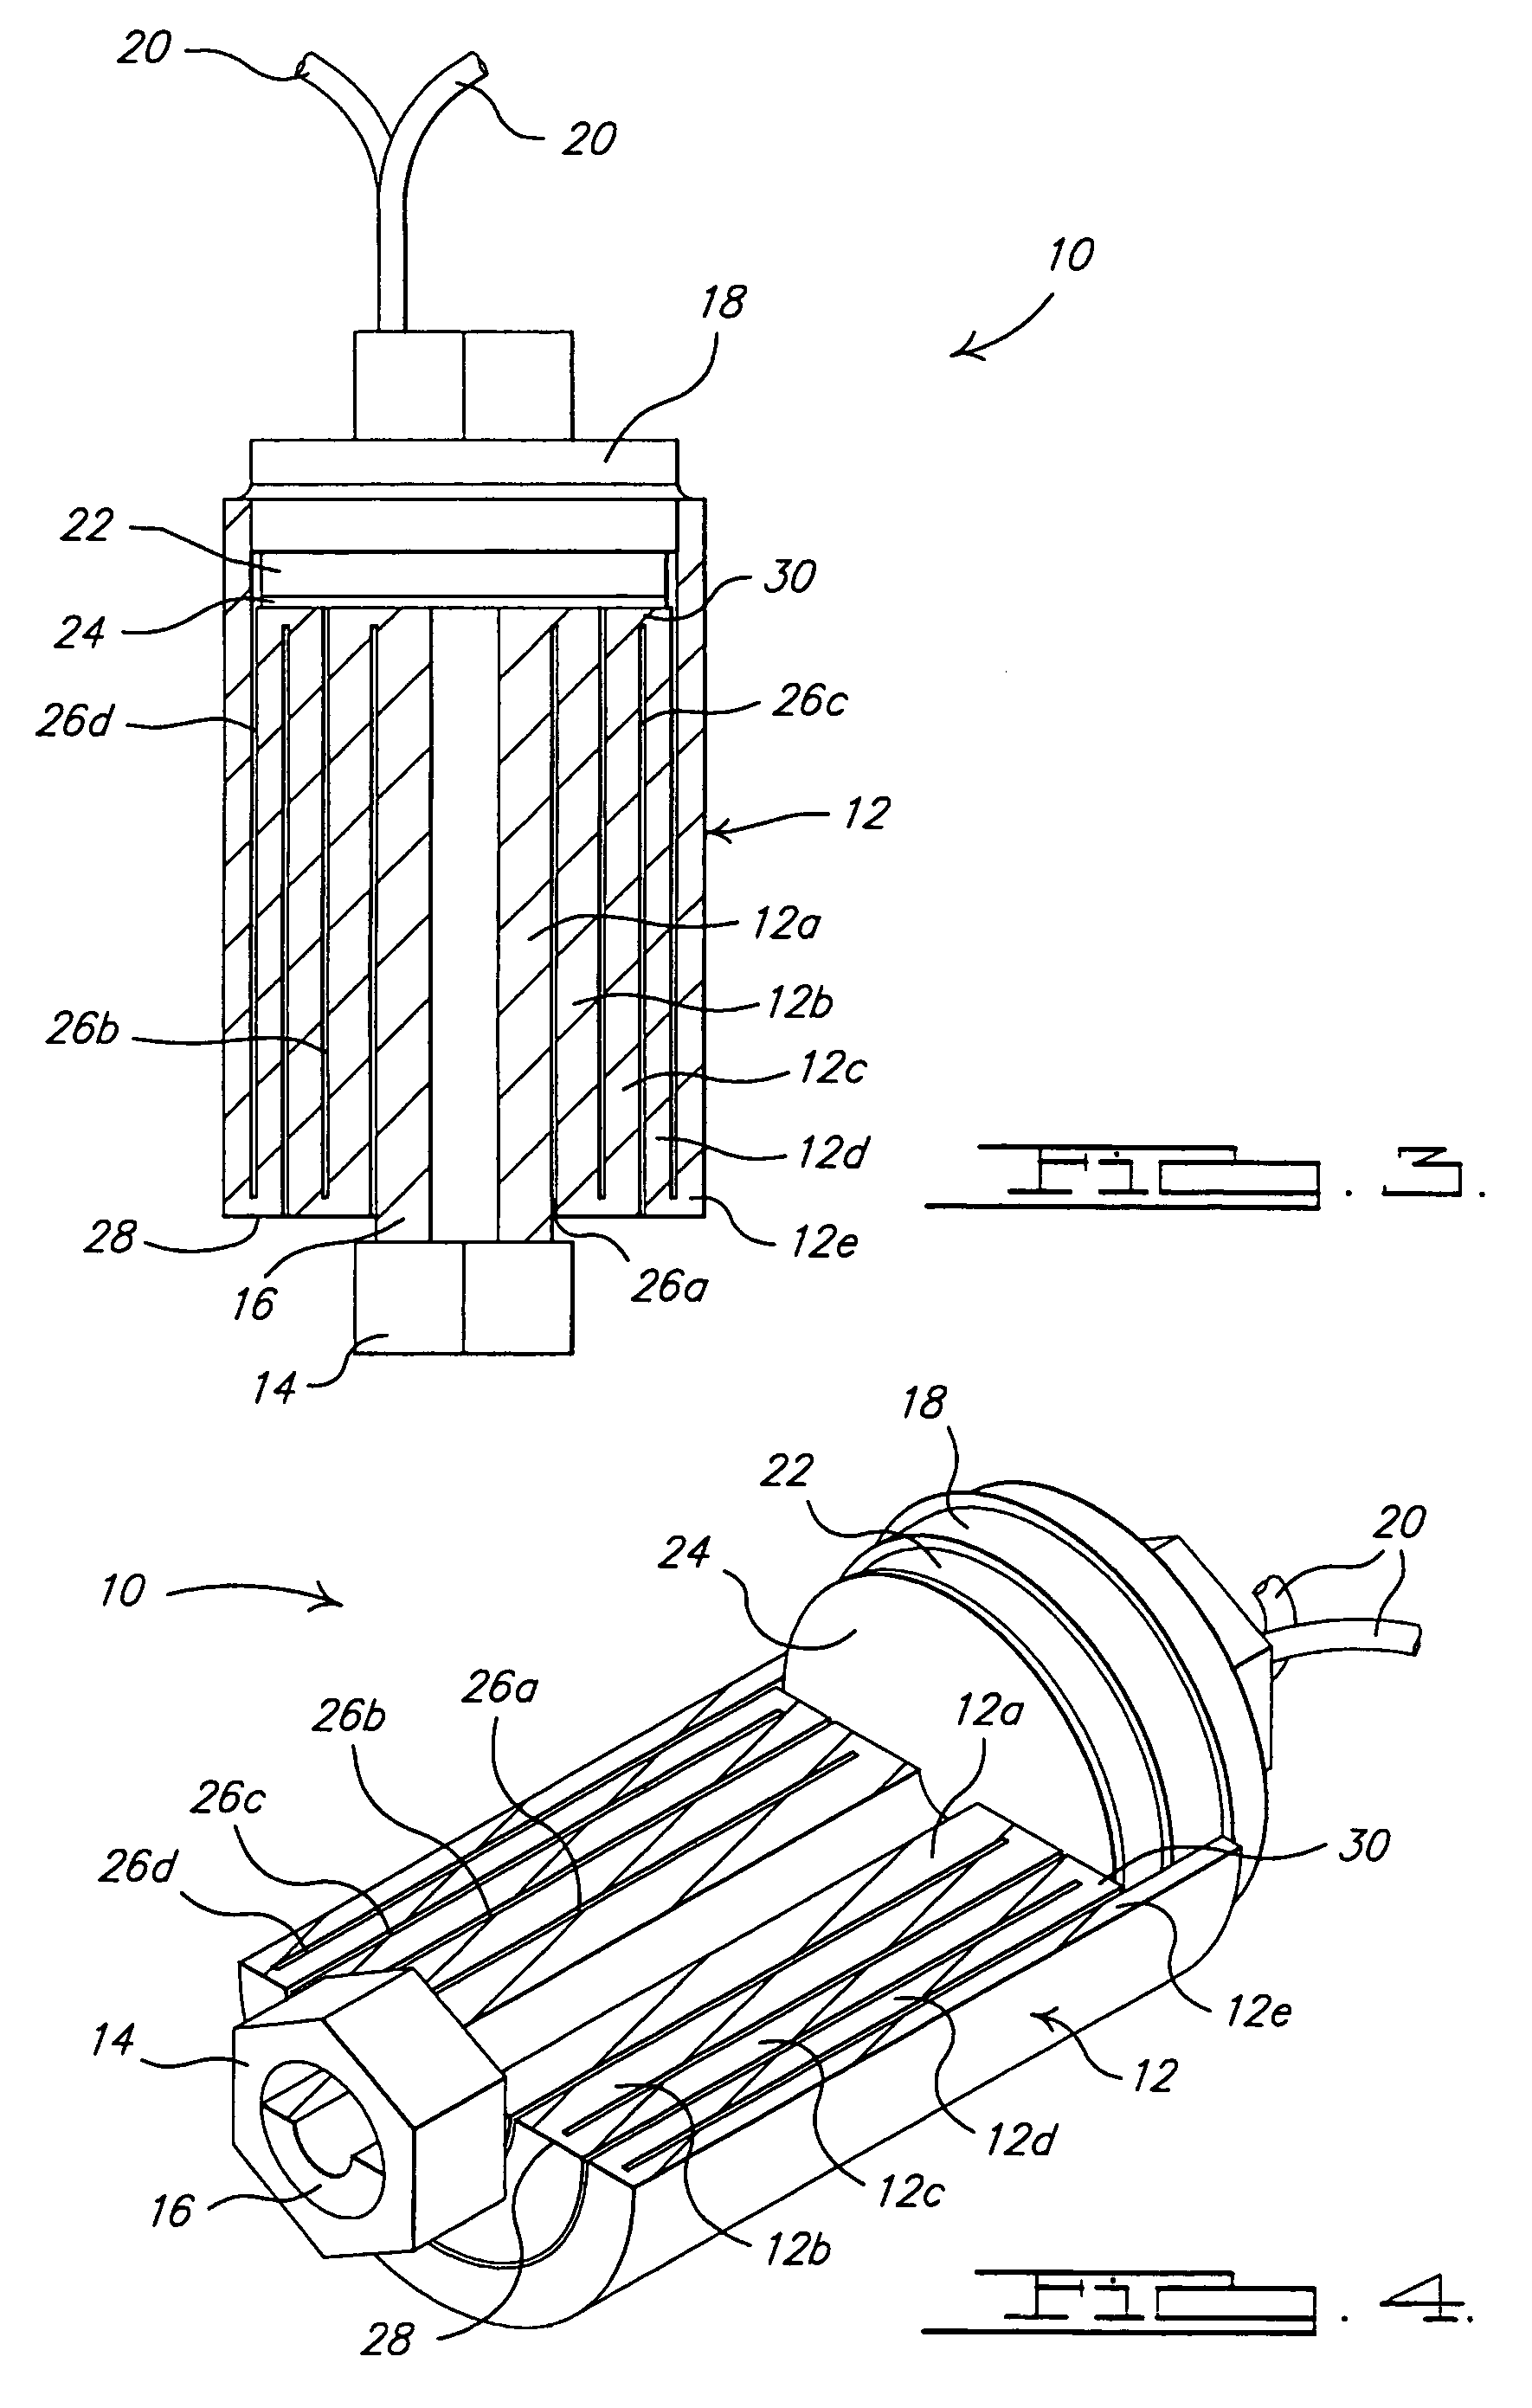 Concentric tube shape memory alloy actuator apparatus and method